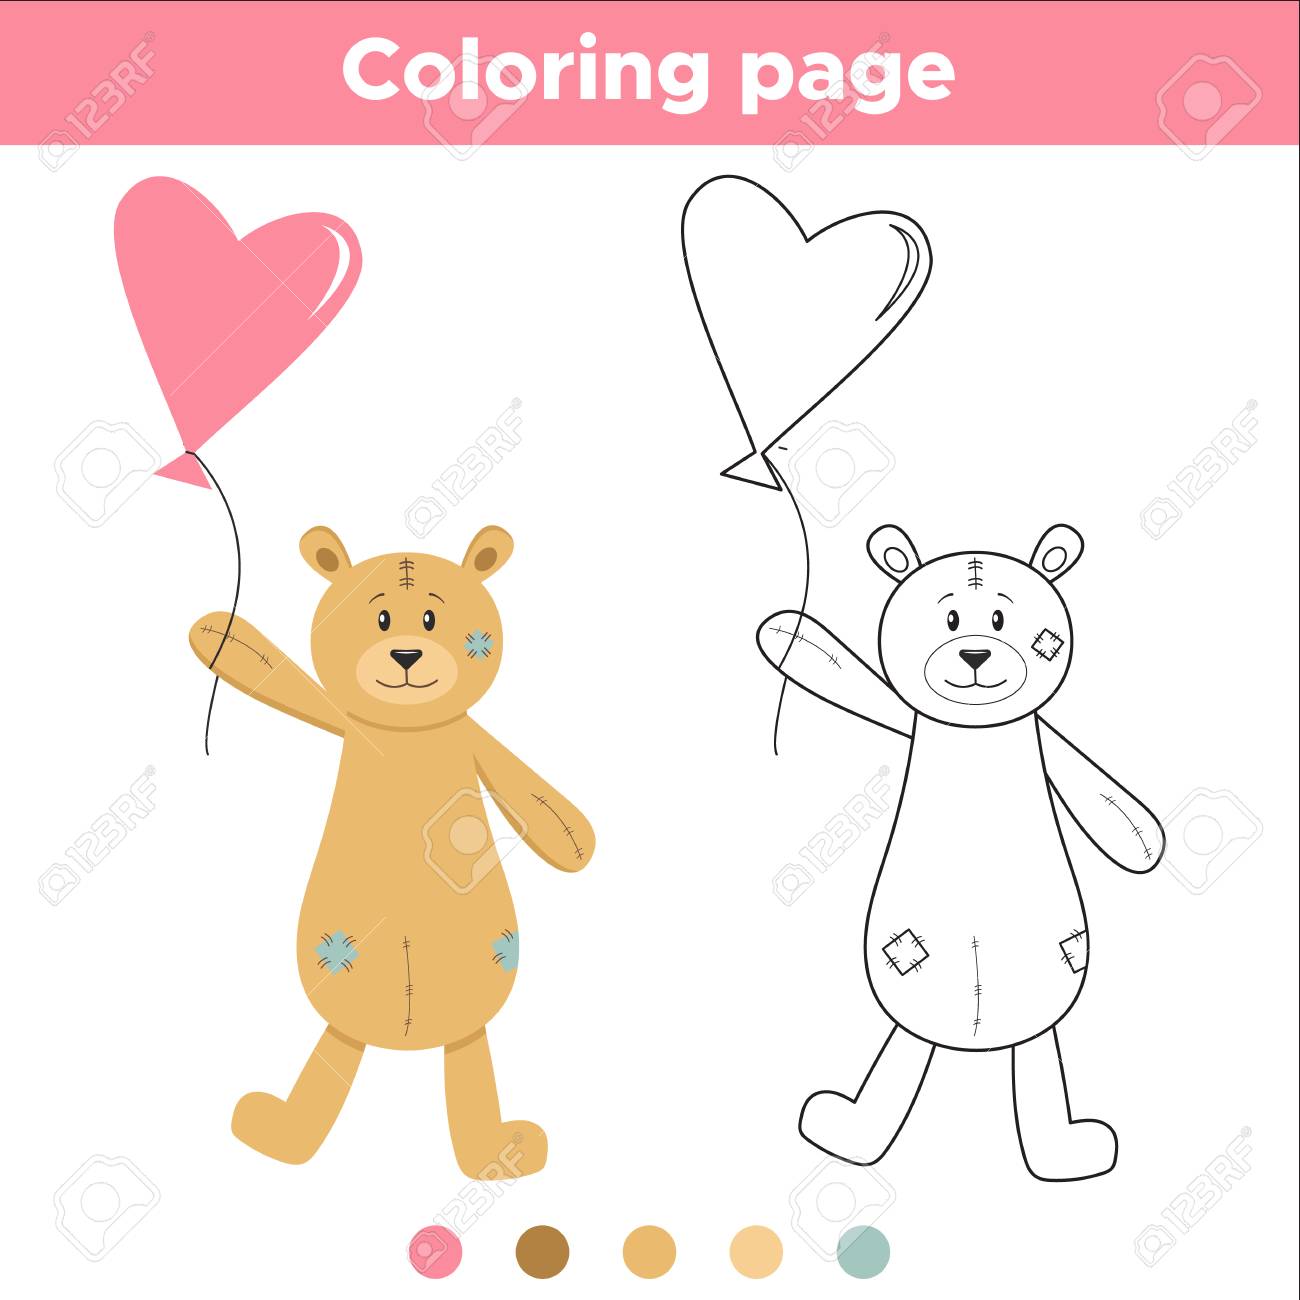 Coloring page for kids cartoon teddy bear with heart balloon birthday and valentines day theme educational game vector illustration royalty free svg cliparts vectors and stock illustration image